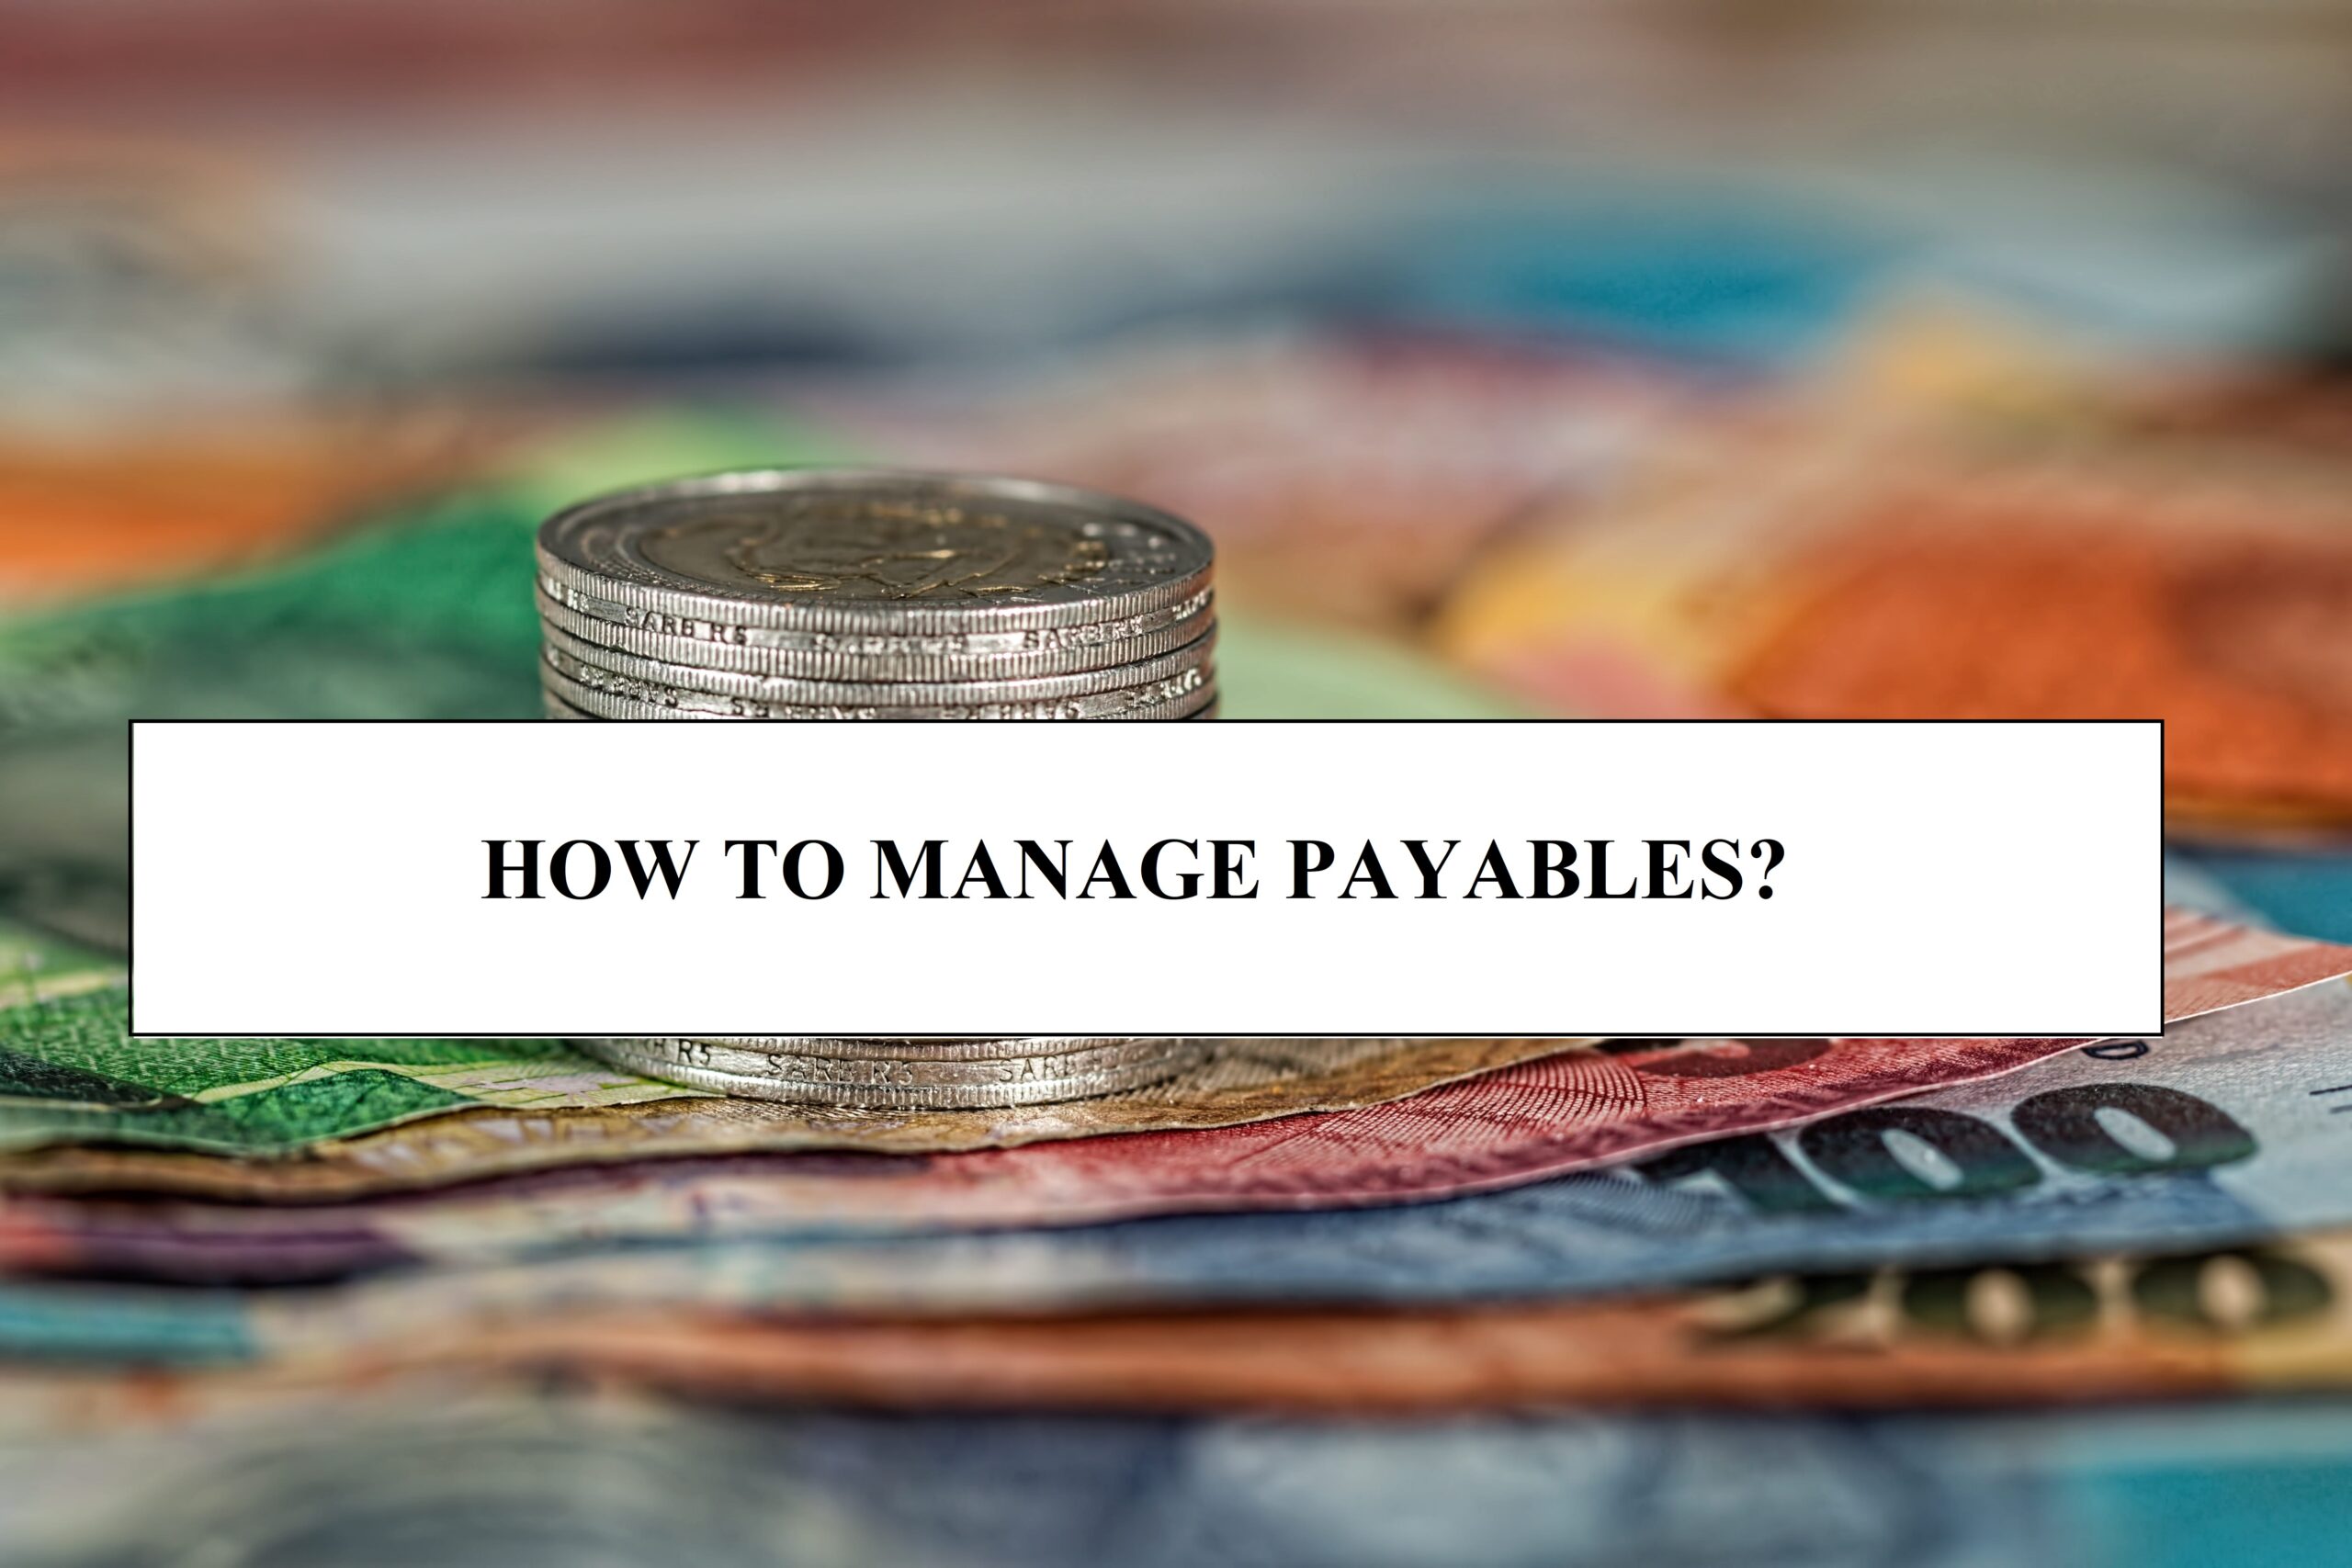 HOW TO MANAGE PAYABLES?